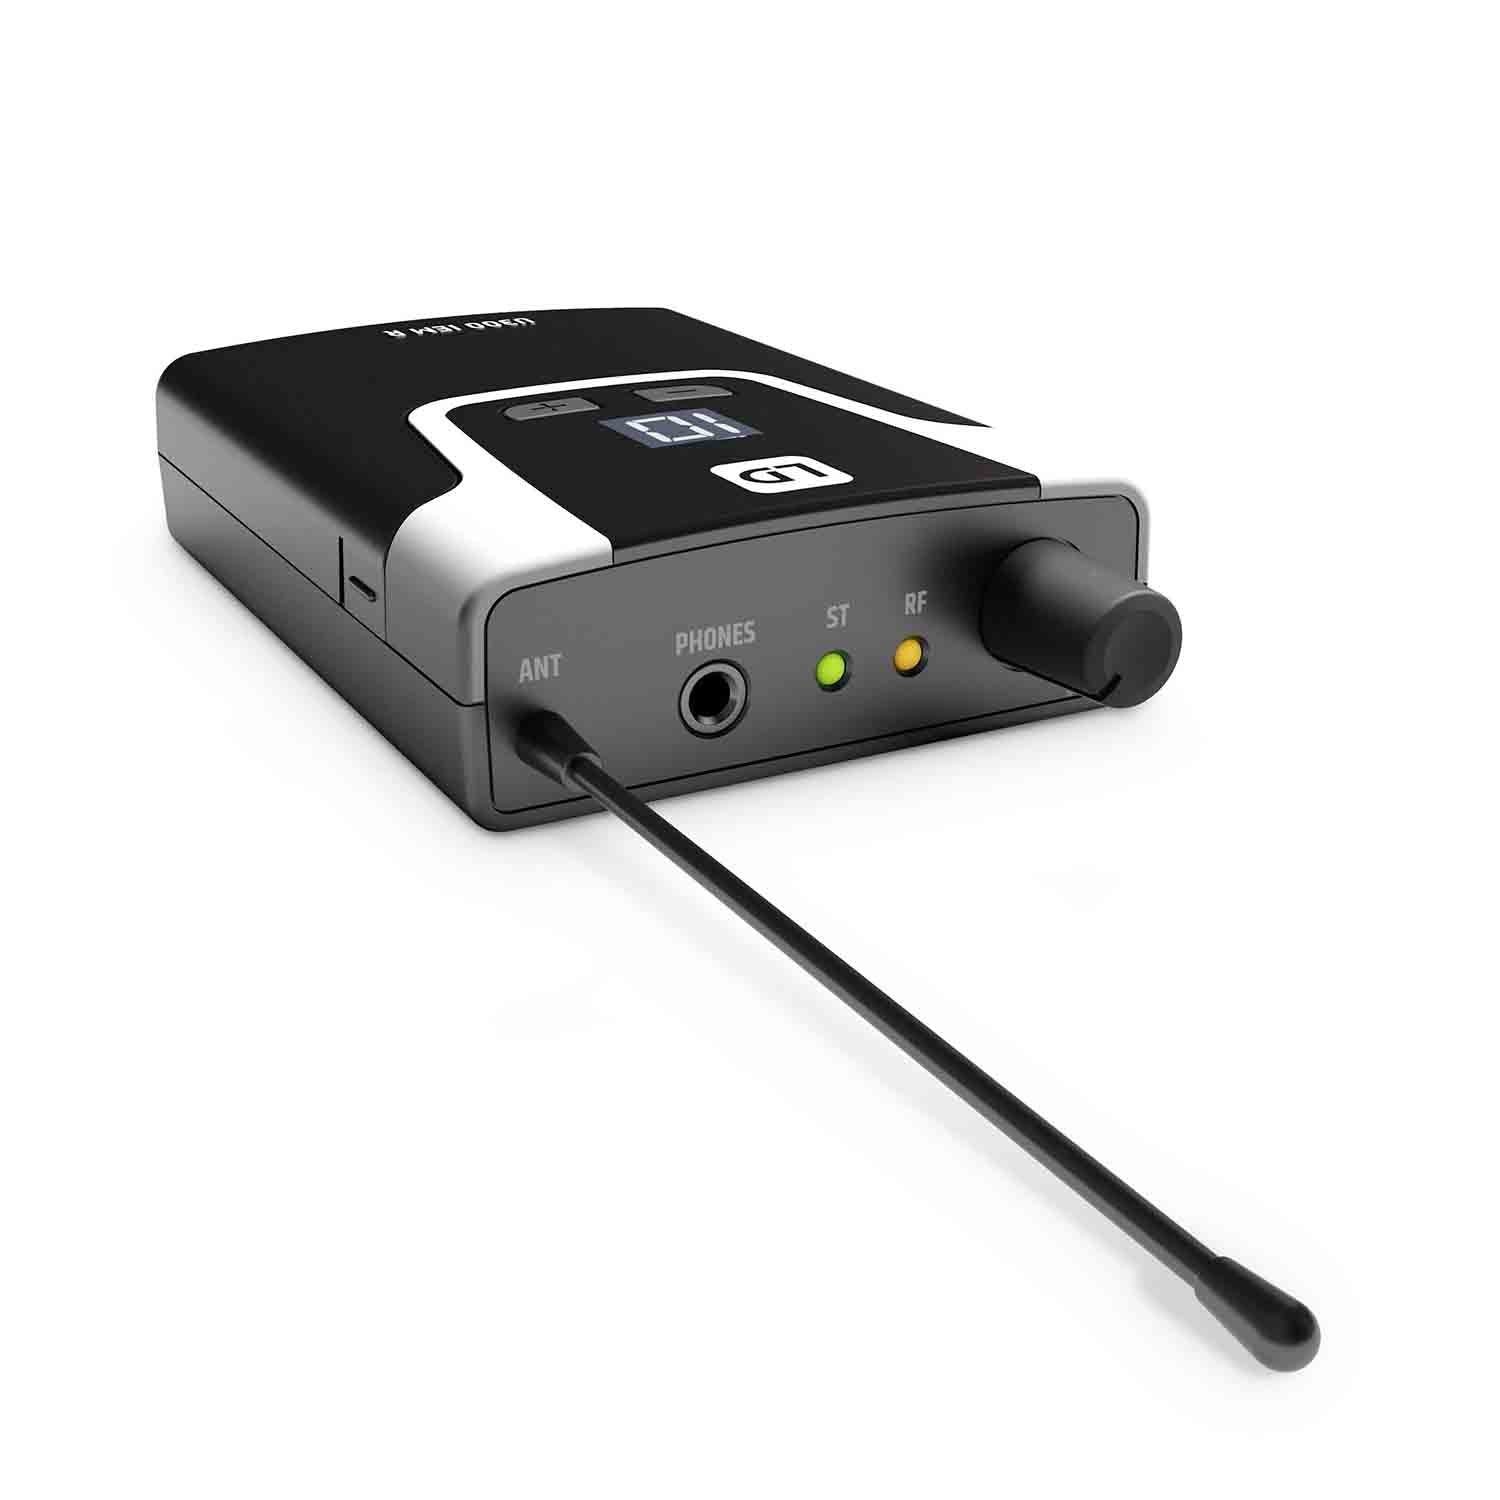 LD Systems U304.7 IEM HP In-Ear Monitoring System with Earphones (470 - 490 MHz) - Hollywood DJ